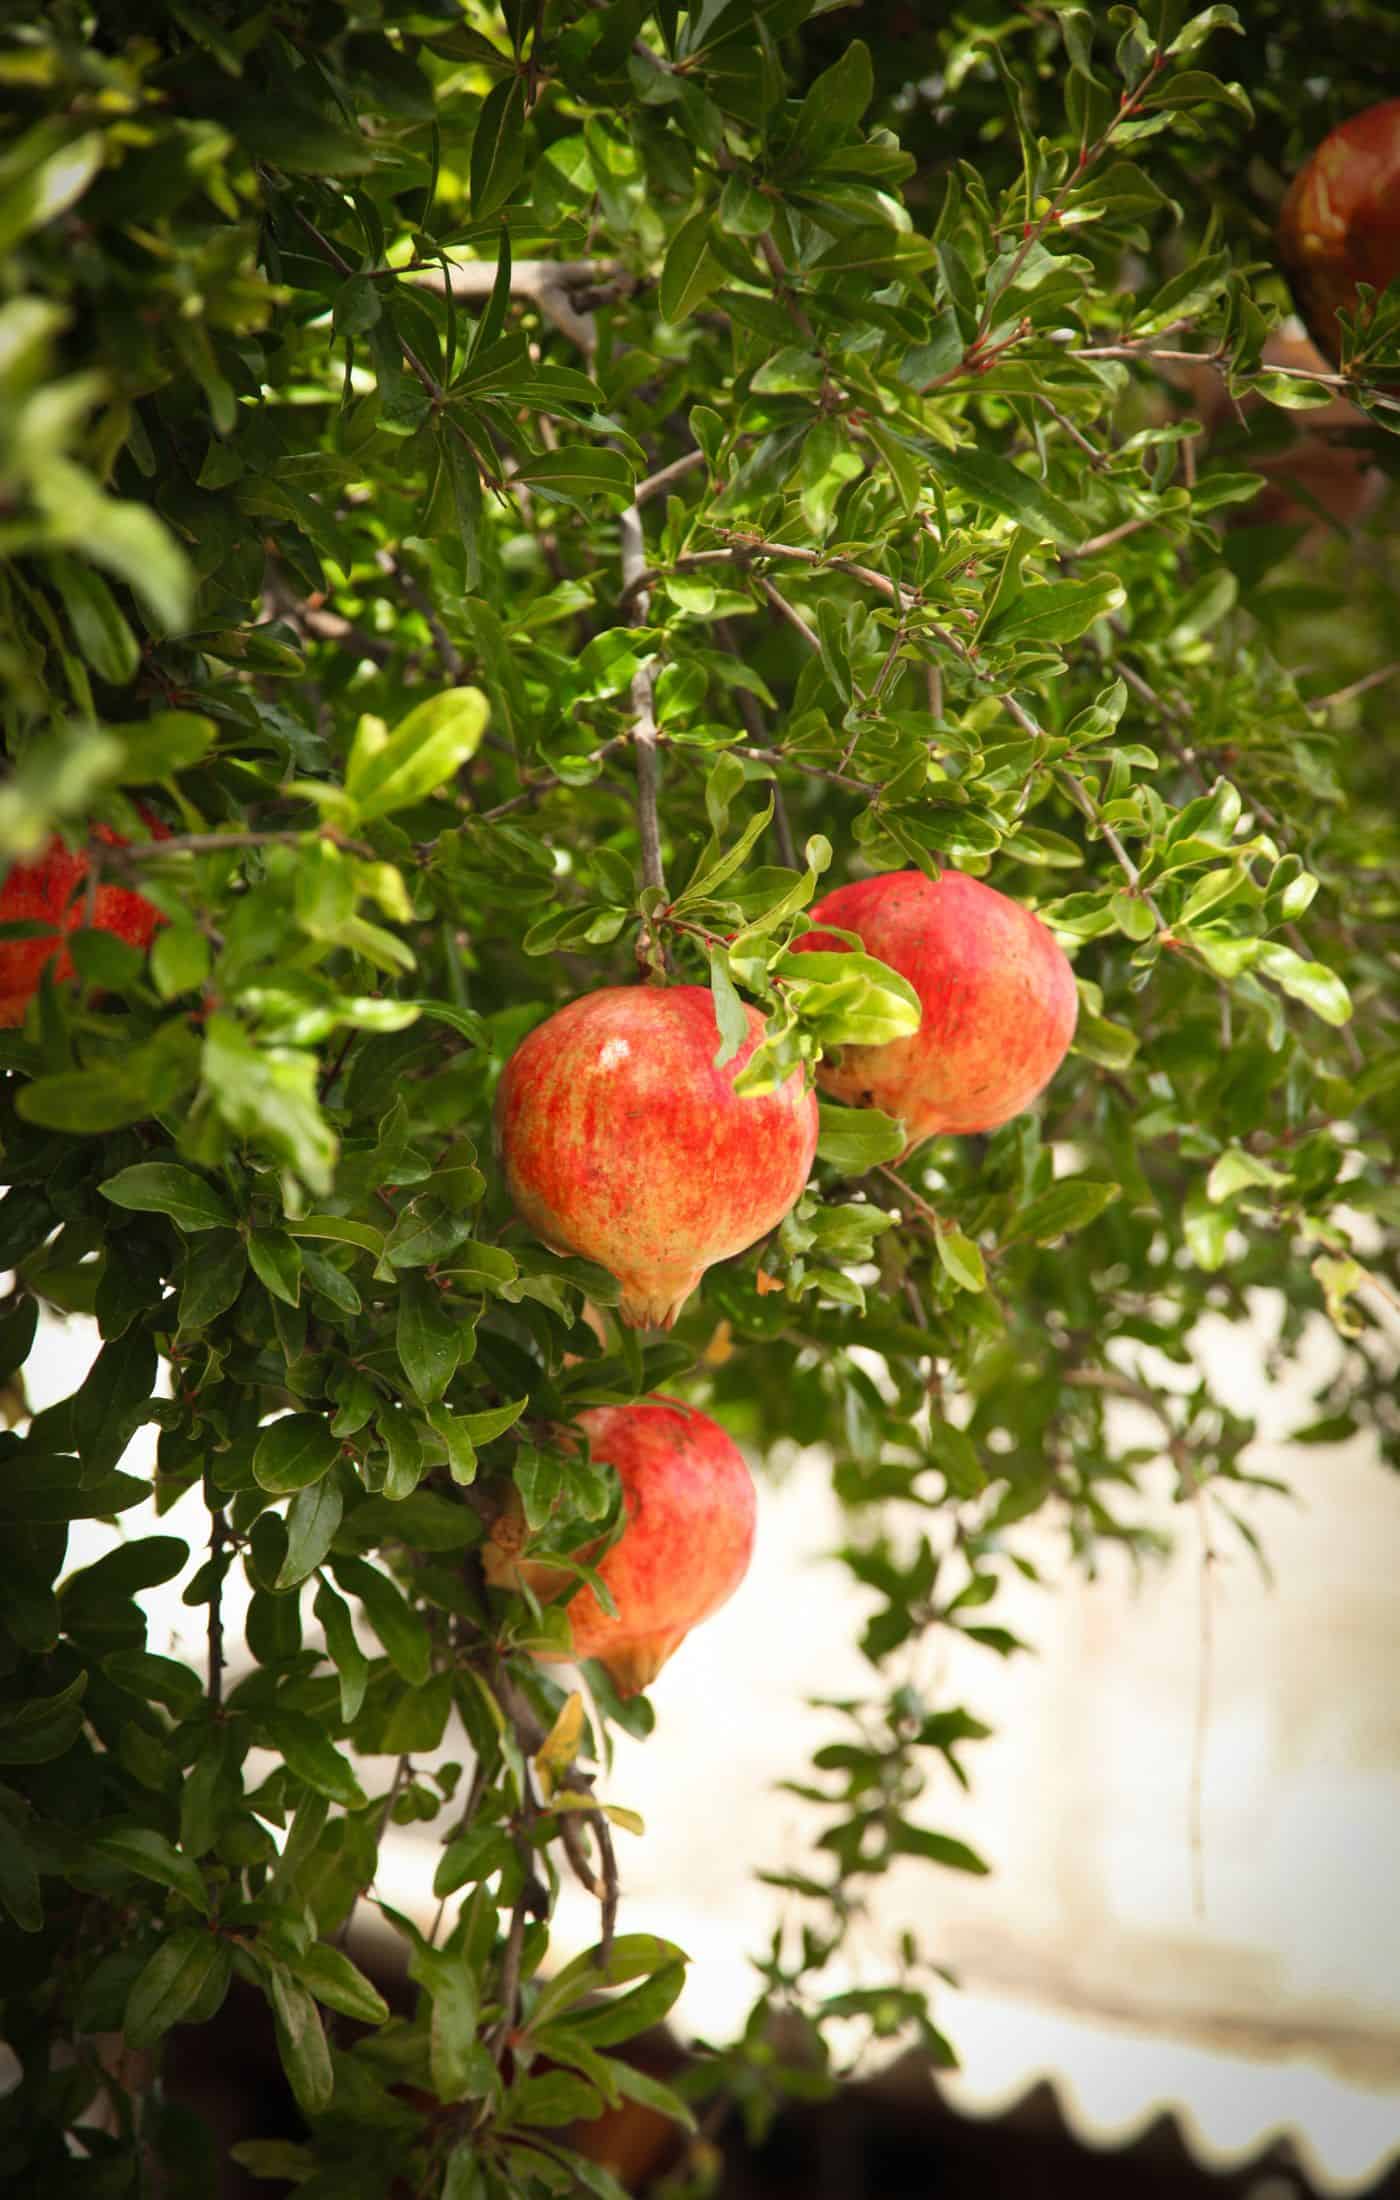 Pomegranate tree branches - care tips